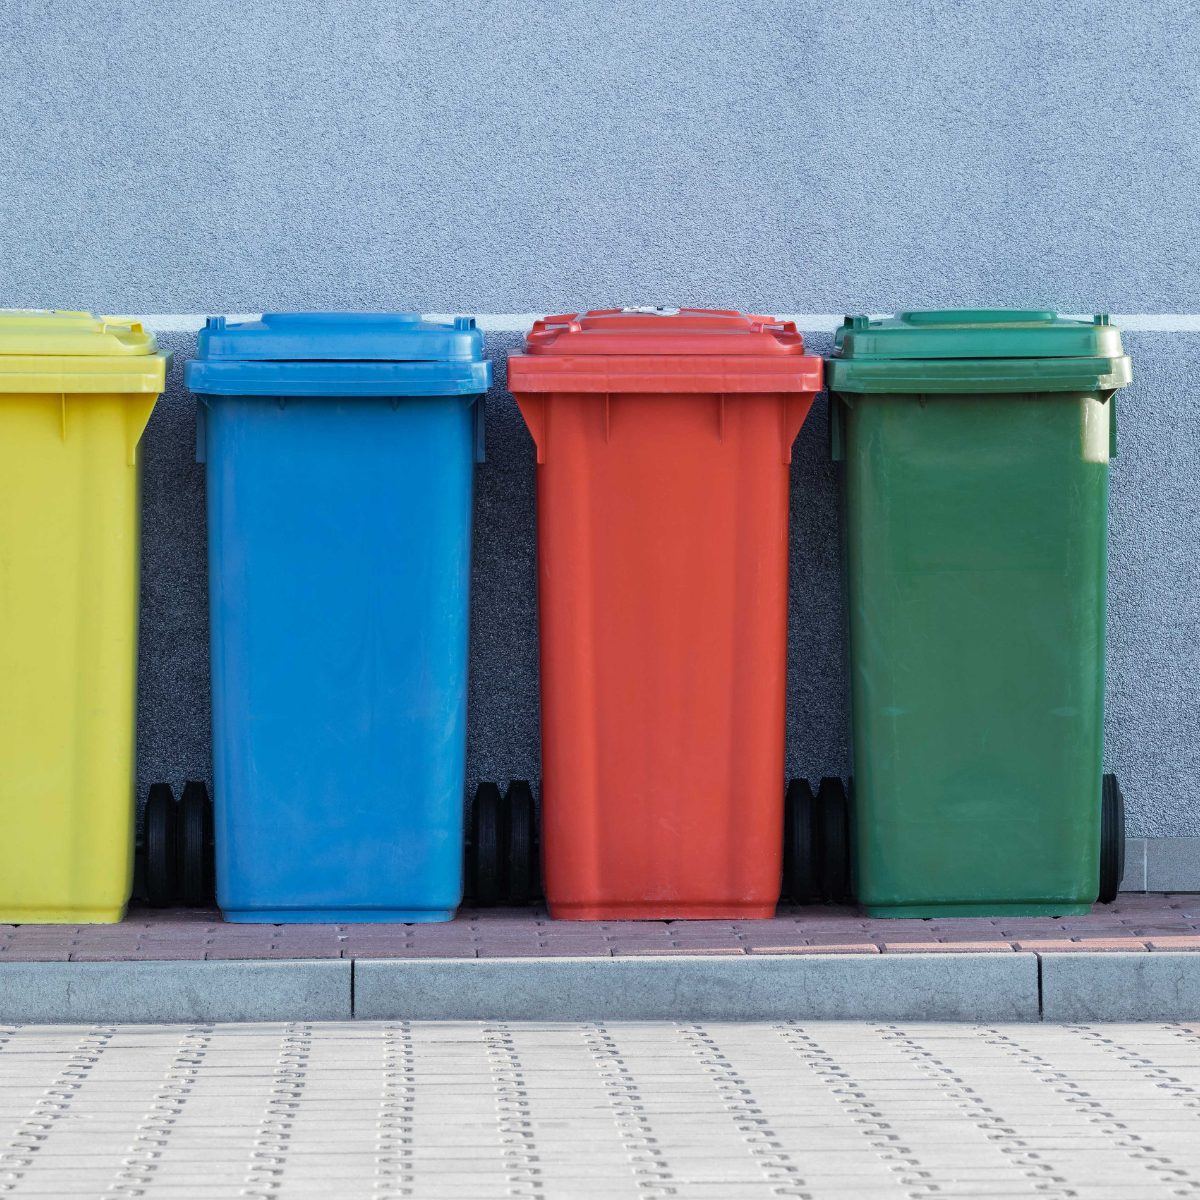 The 5 great benefits of workplace recycling and how to do it